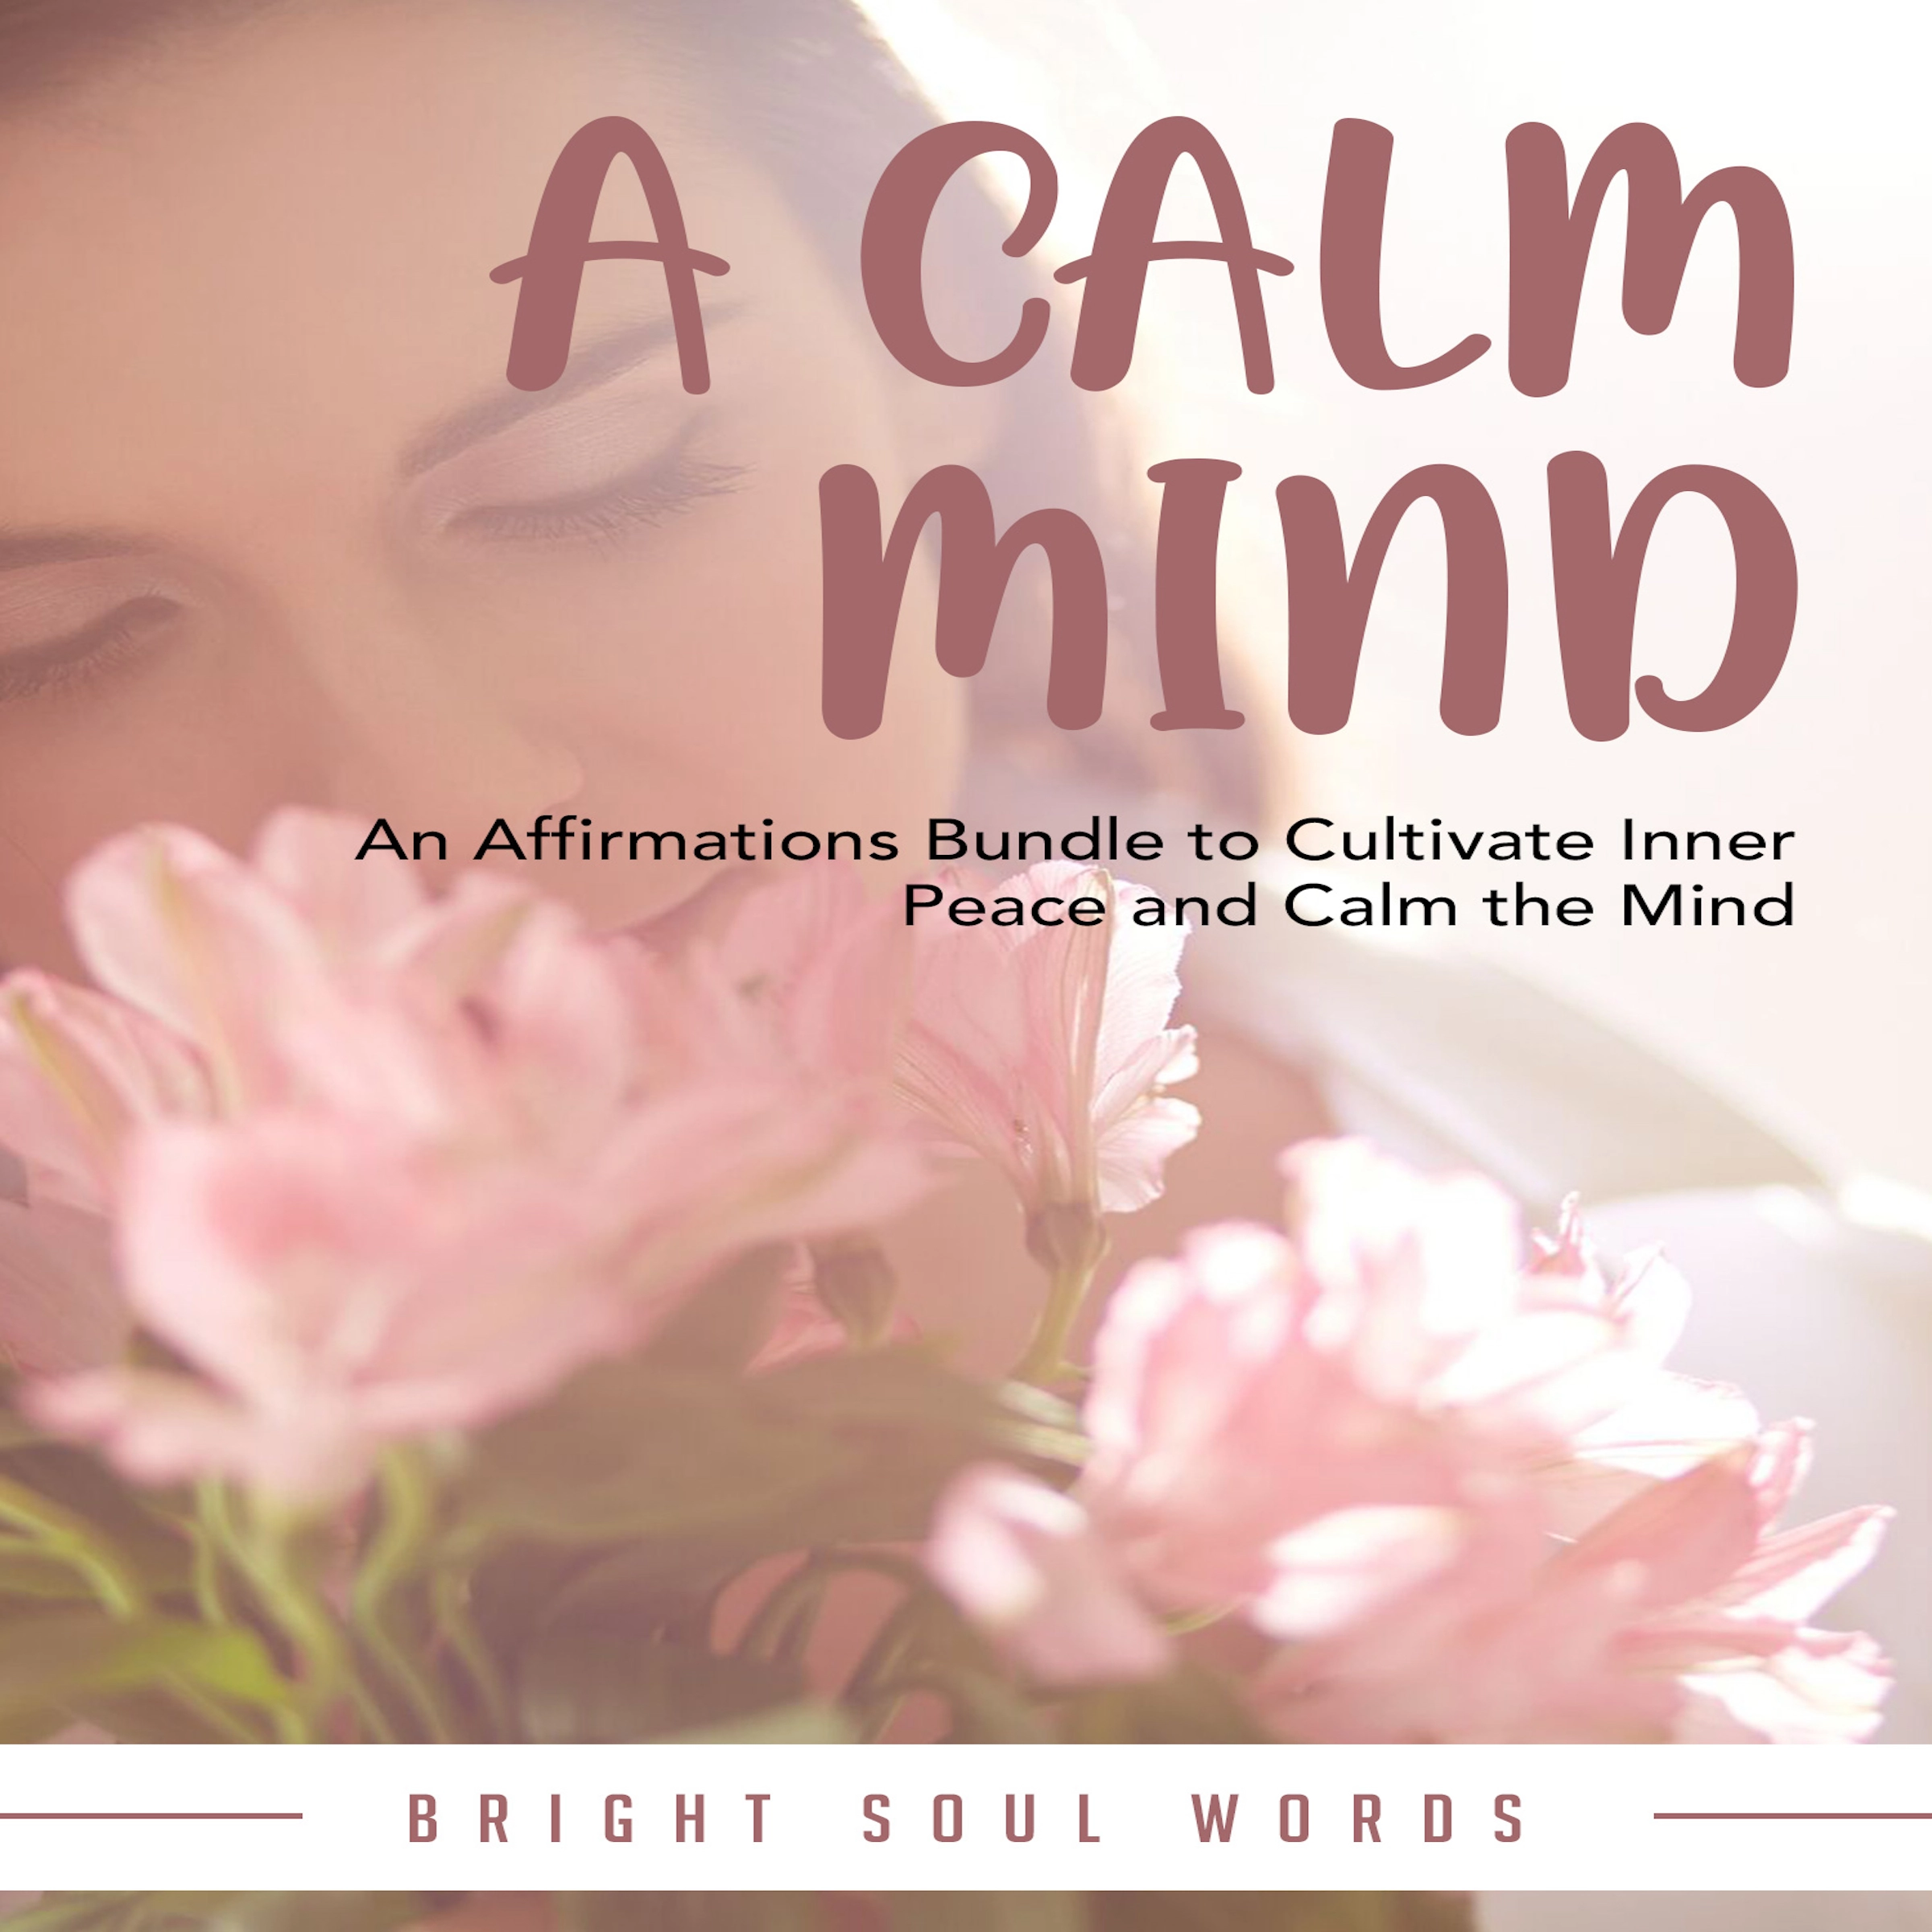 A Calm Mind: An Affirmations Bundle to Cultivate Inner Peace and Calm the Mind Audiobook by Bright Soul Words